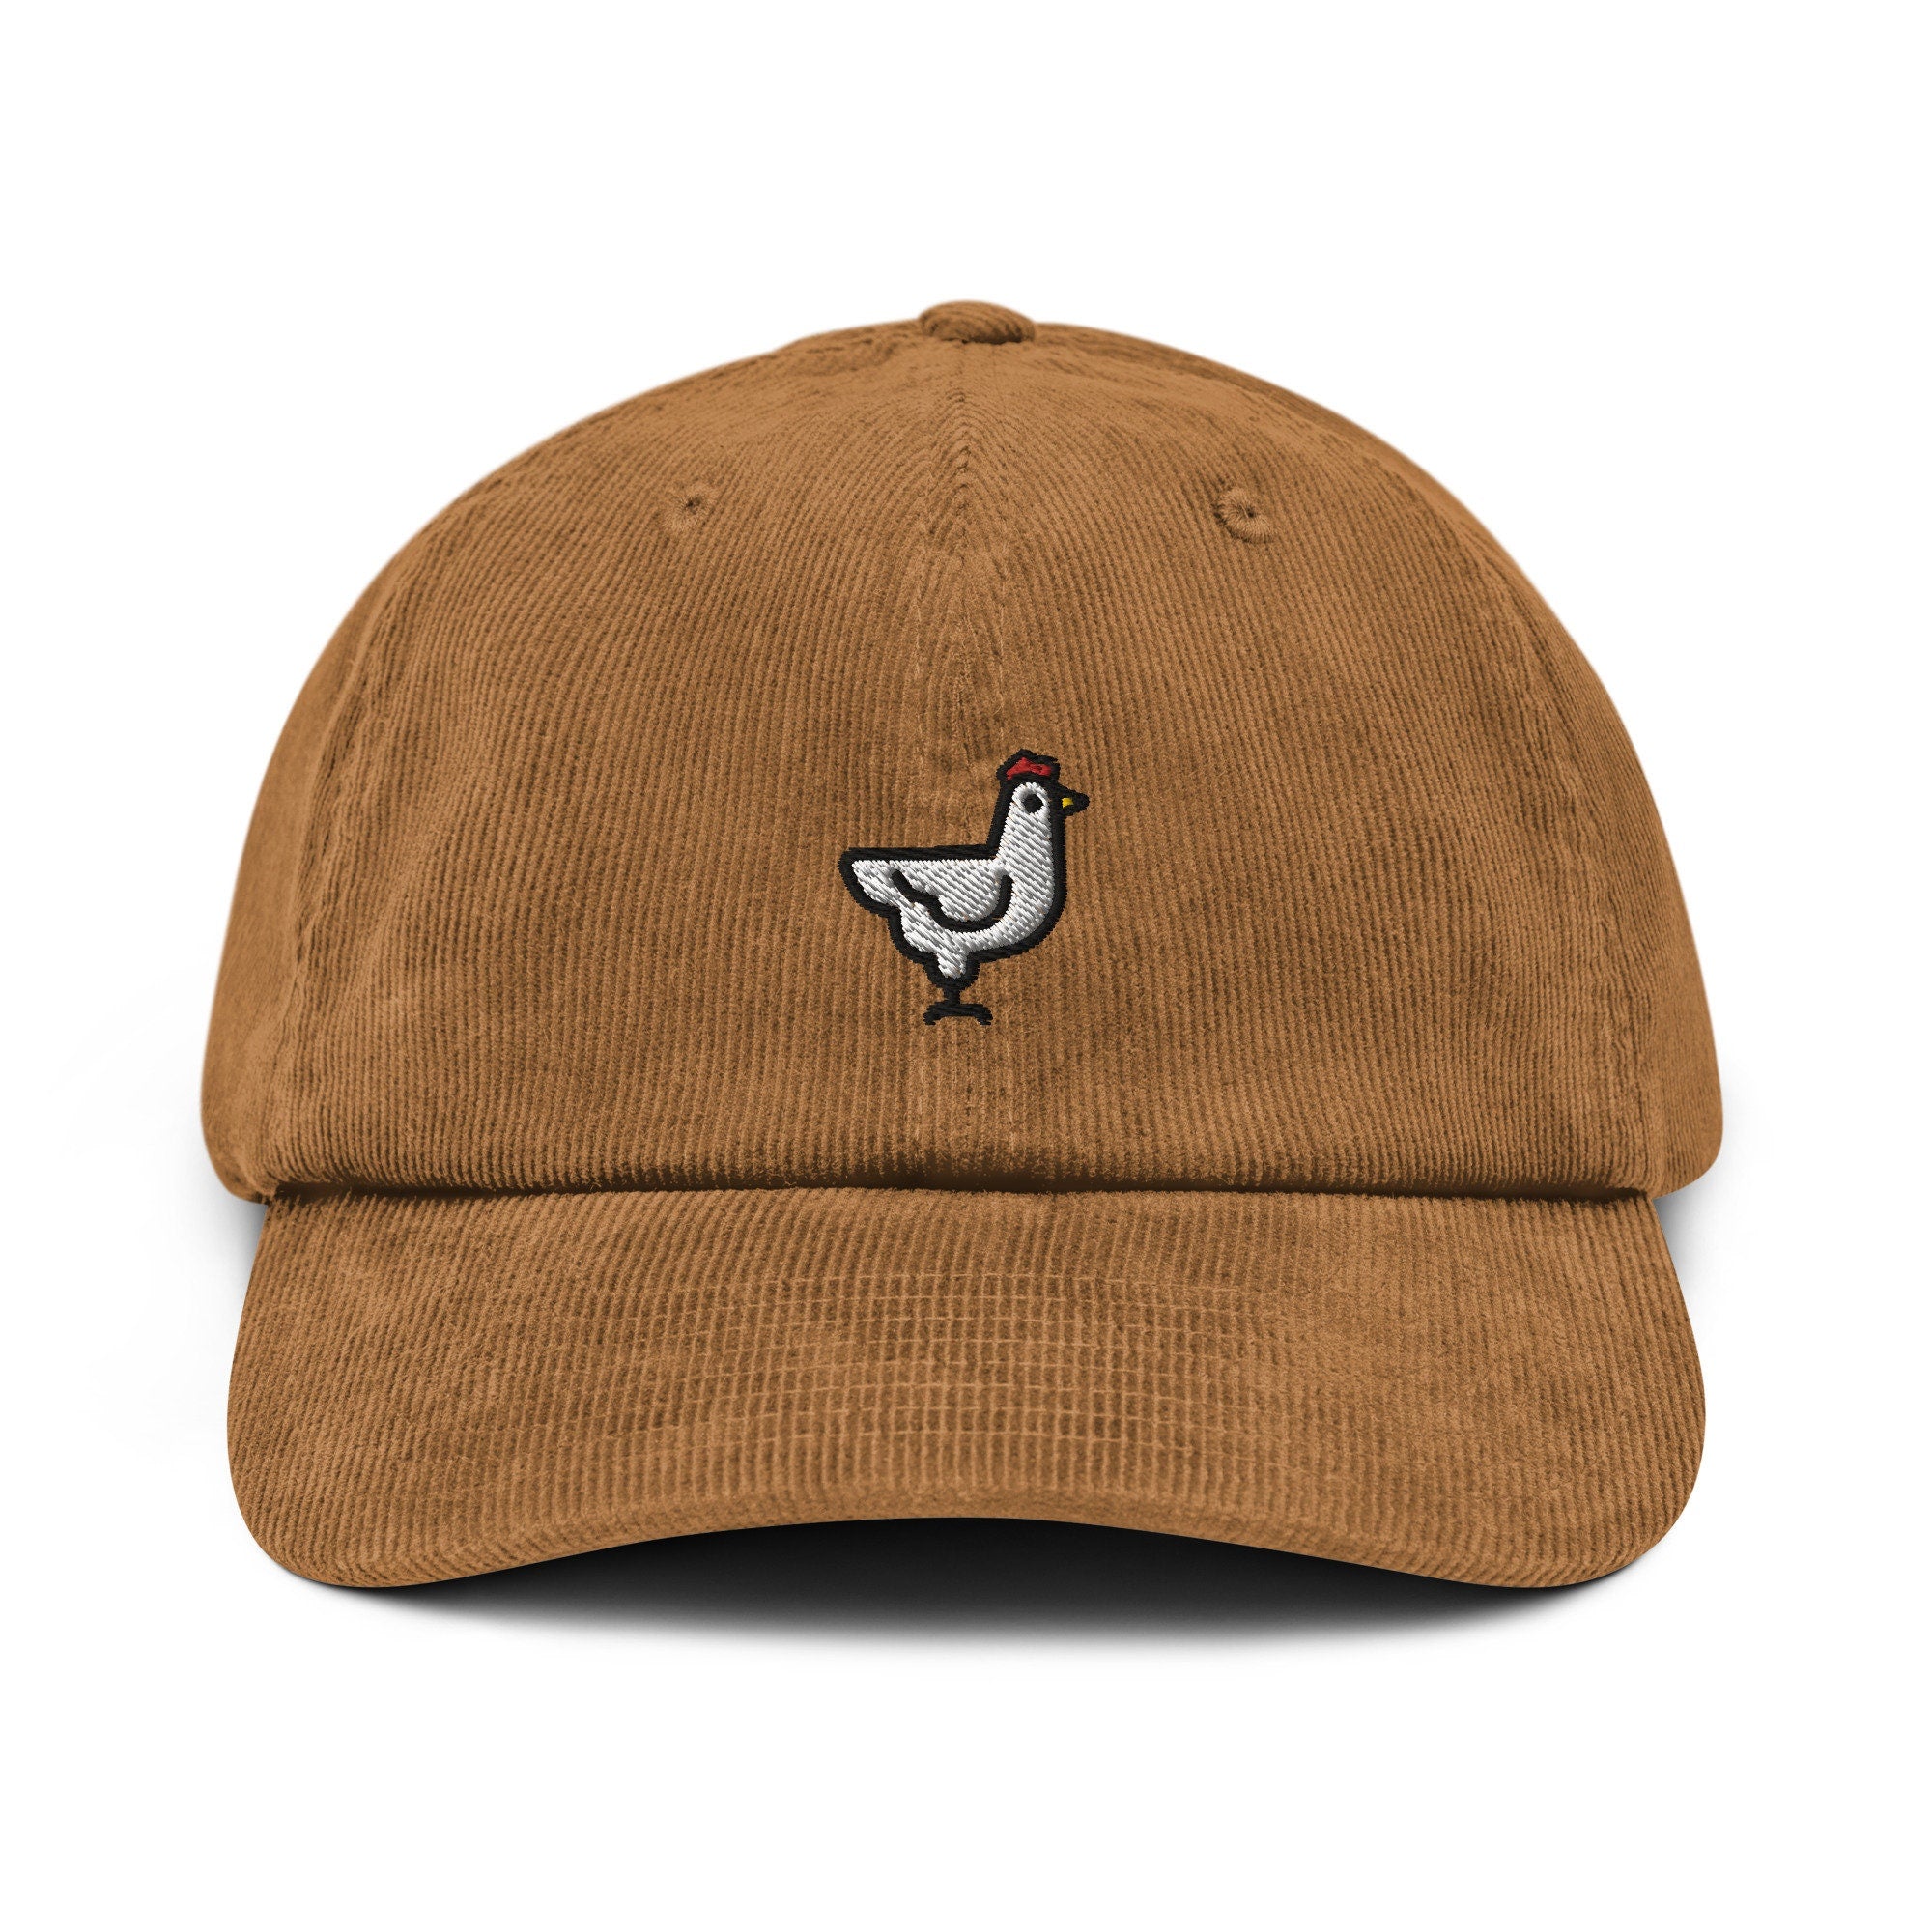 Chicken Corduroy Hat, Handmade Embroidered Corduroy Dad Cap - Multiple Colors